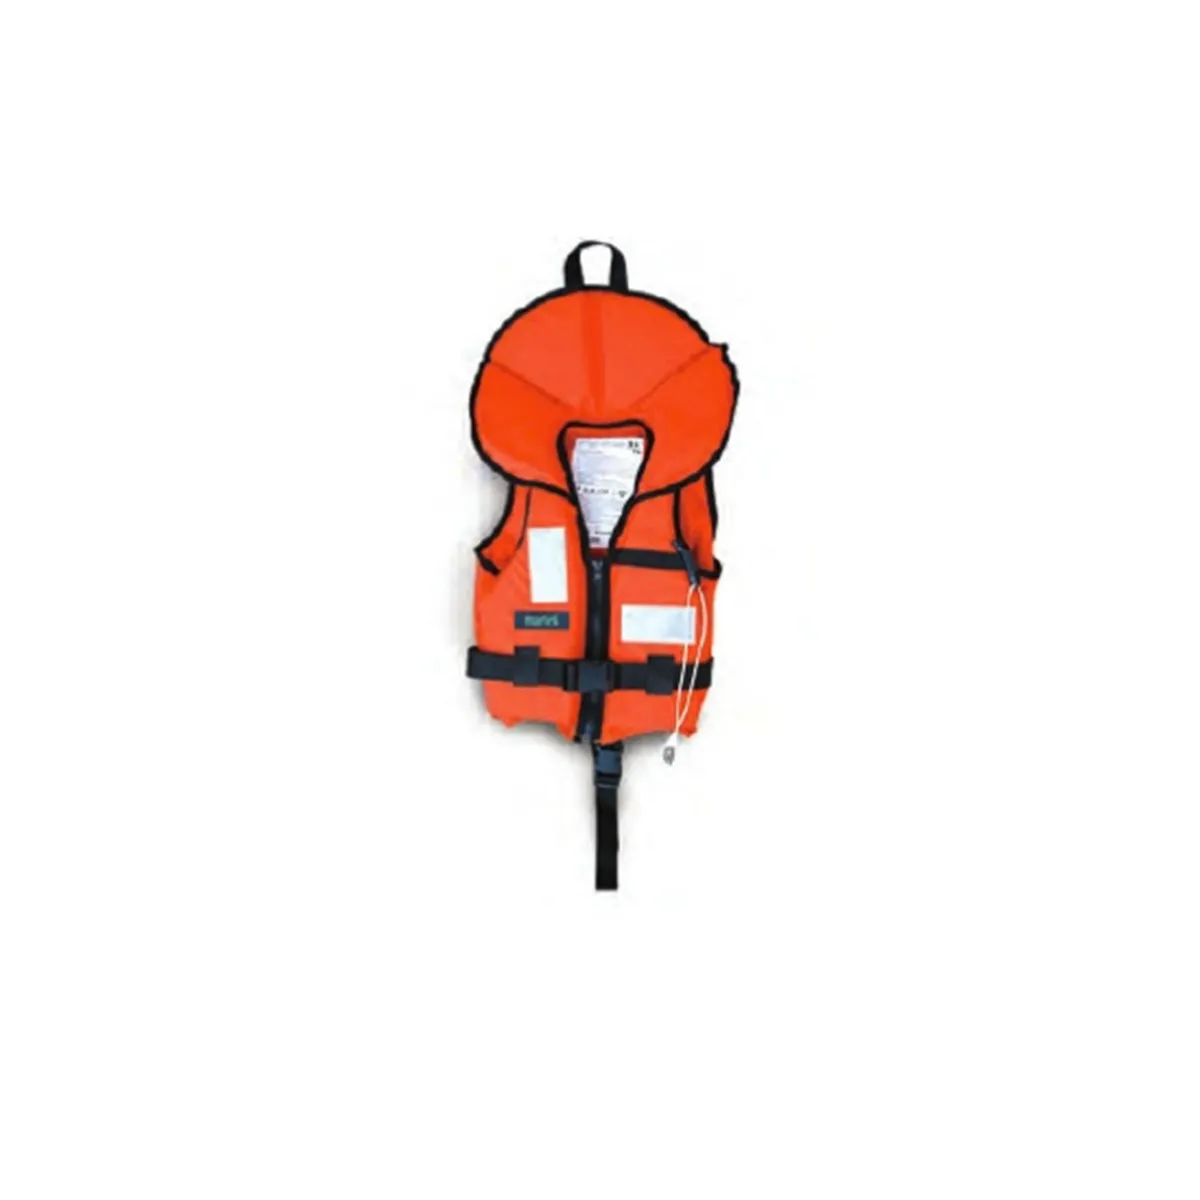 Martek Child Life Jacket lifesaver life ring lifebuoy Solas Compliant with the International Convention for the Safety of Life